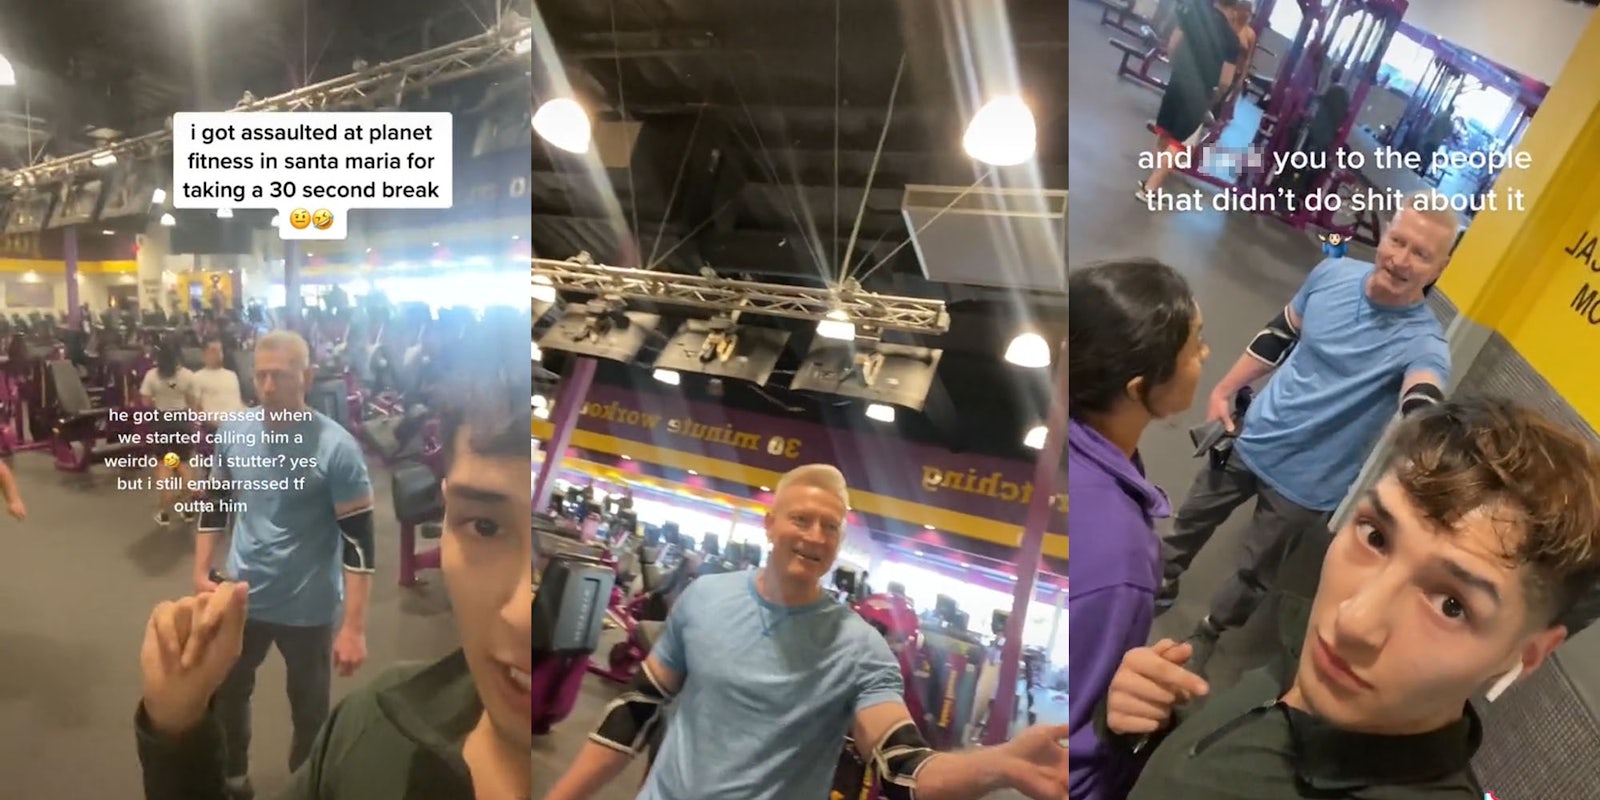 Man pointing hand at other man in planet fitness caption 'I got assaulted at planet fitness in santa maria for taking a 30 second break he got embarrassed when we started to call him a weirdo did I stutter? yes but I embarrassed tf outta him' (l) Man at gym hand up (c) Man talking to woman other man records caption 'and blank you to the people that didn't do shit about it' (r)